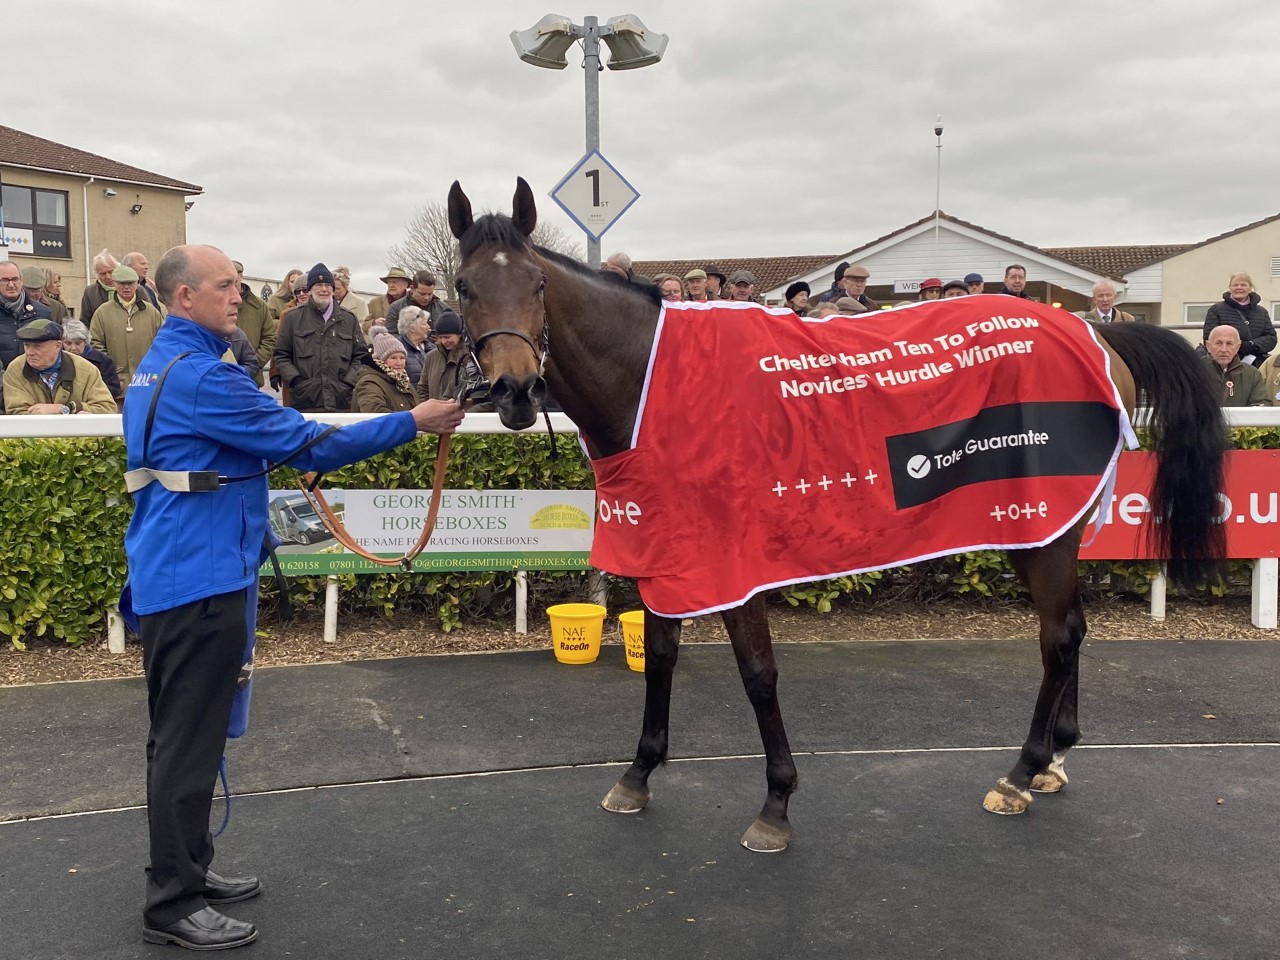 COULD TALKABOUTIT - A lovely win at Wincanton